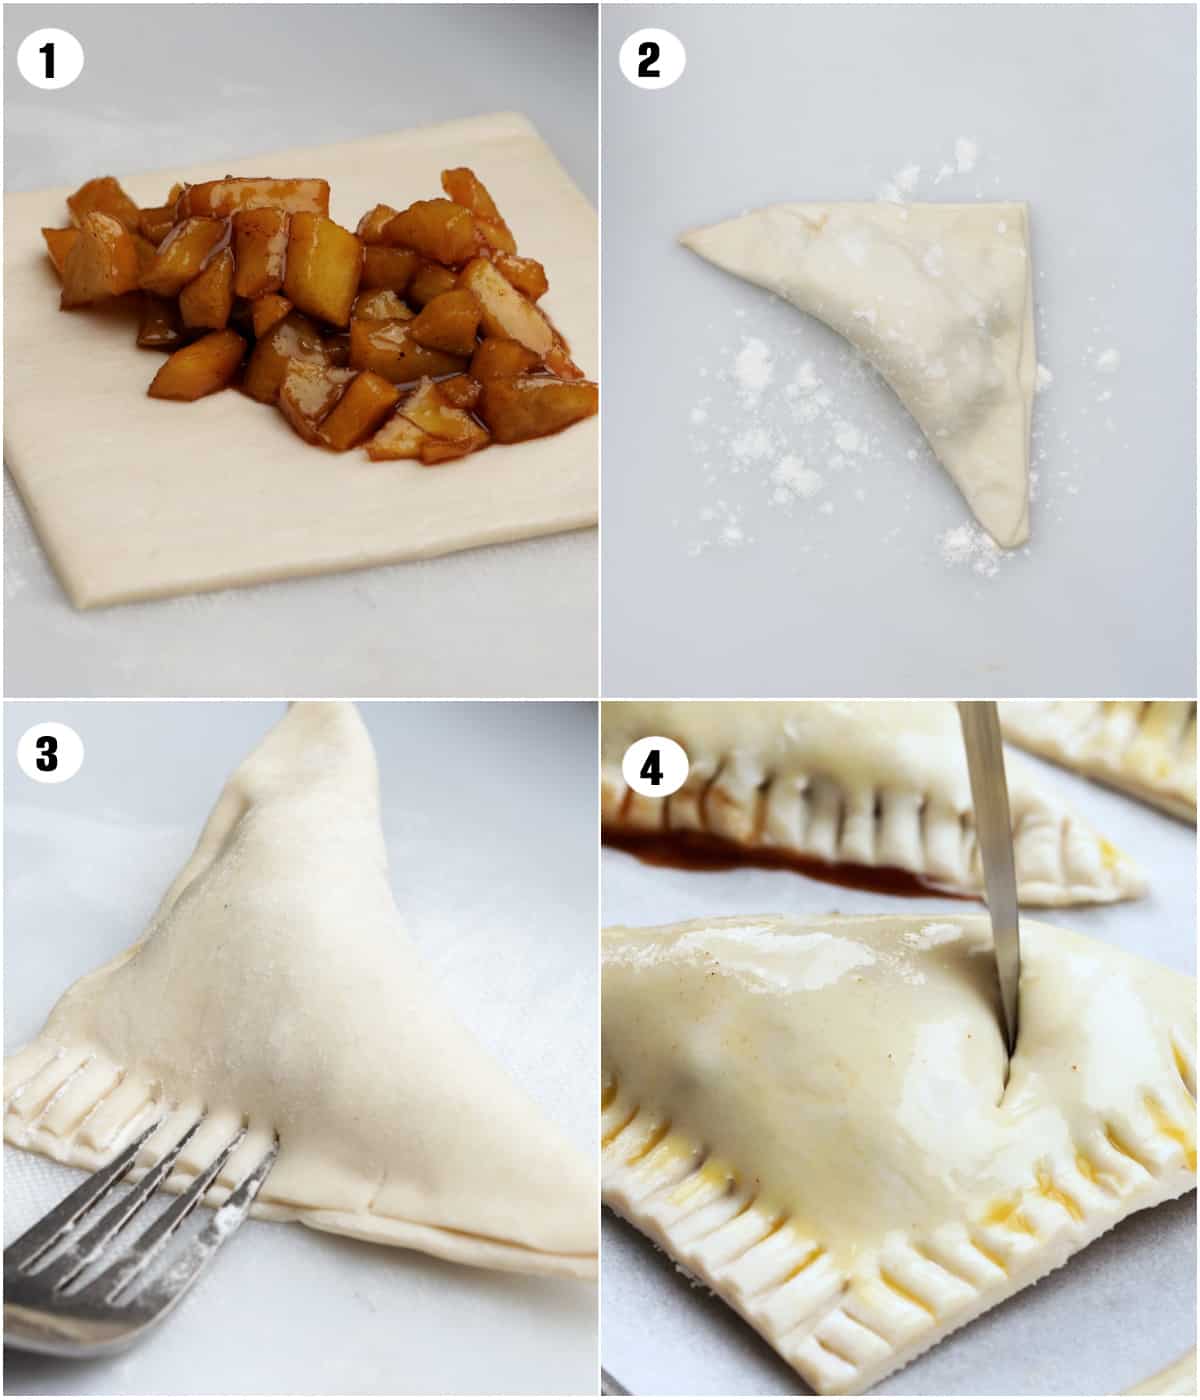 This picture shows how to shape Apple turnovers using puff pastries.